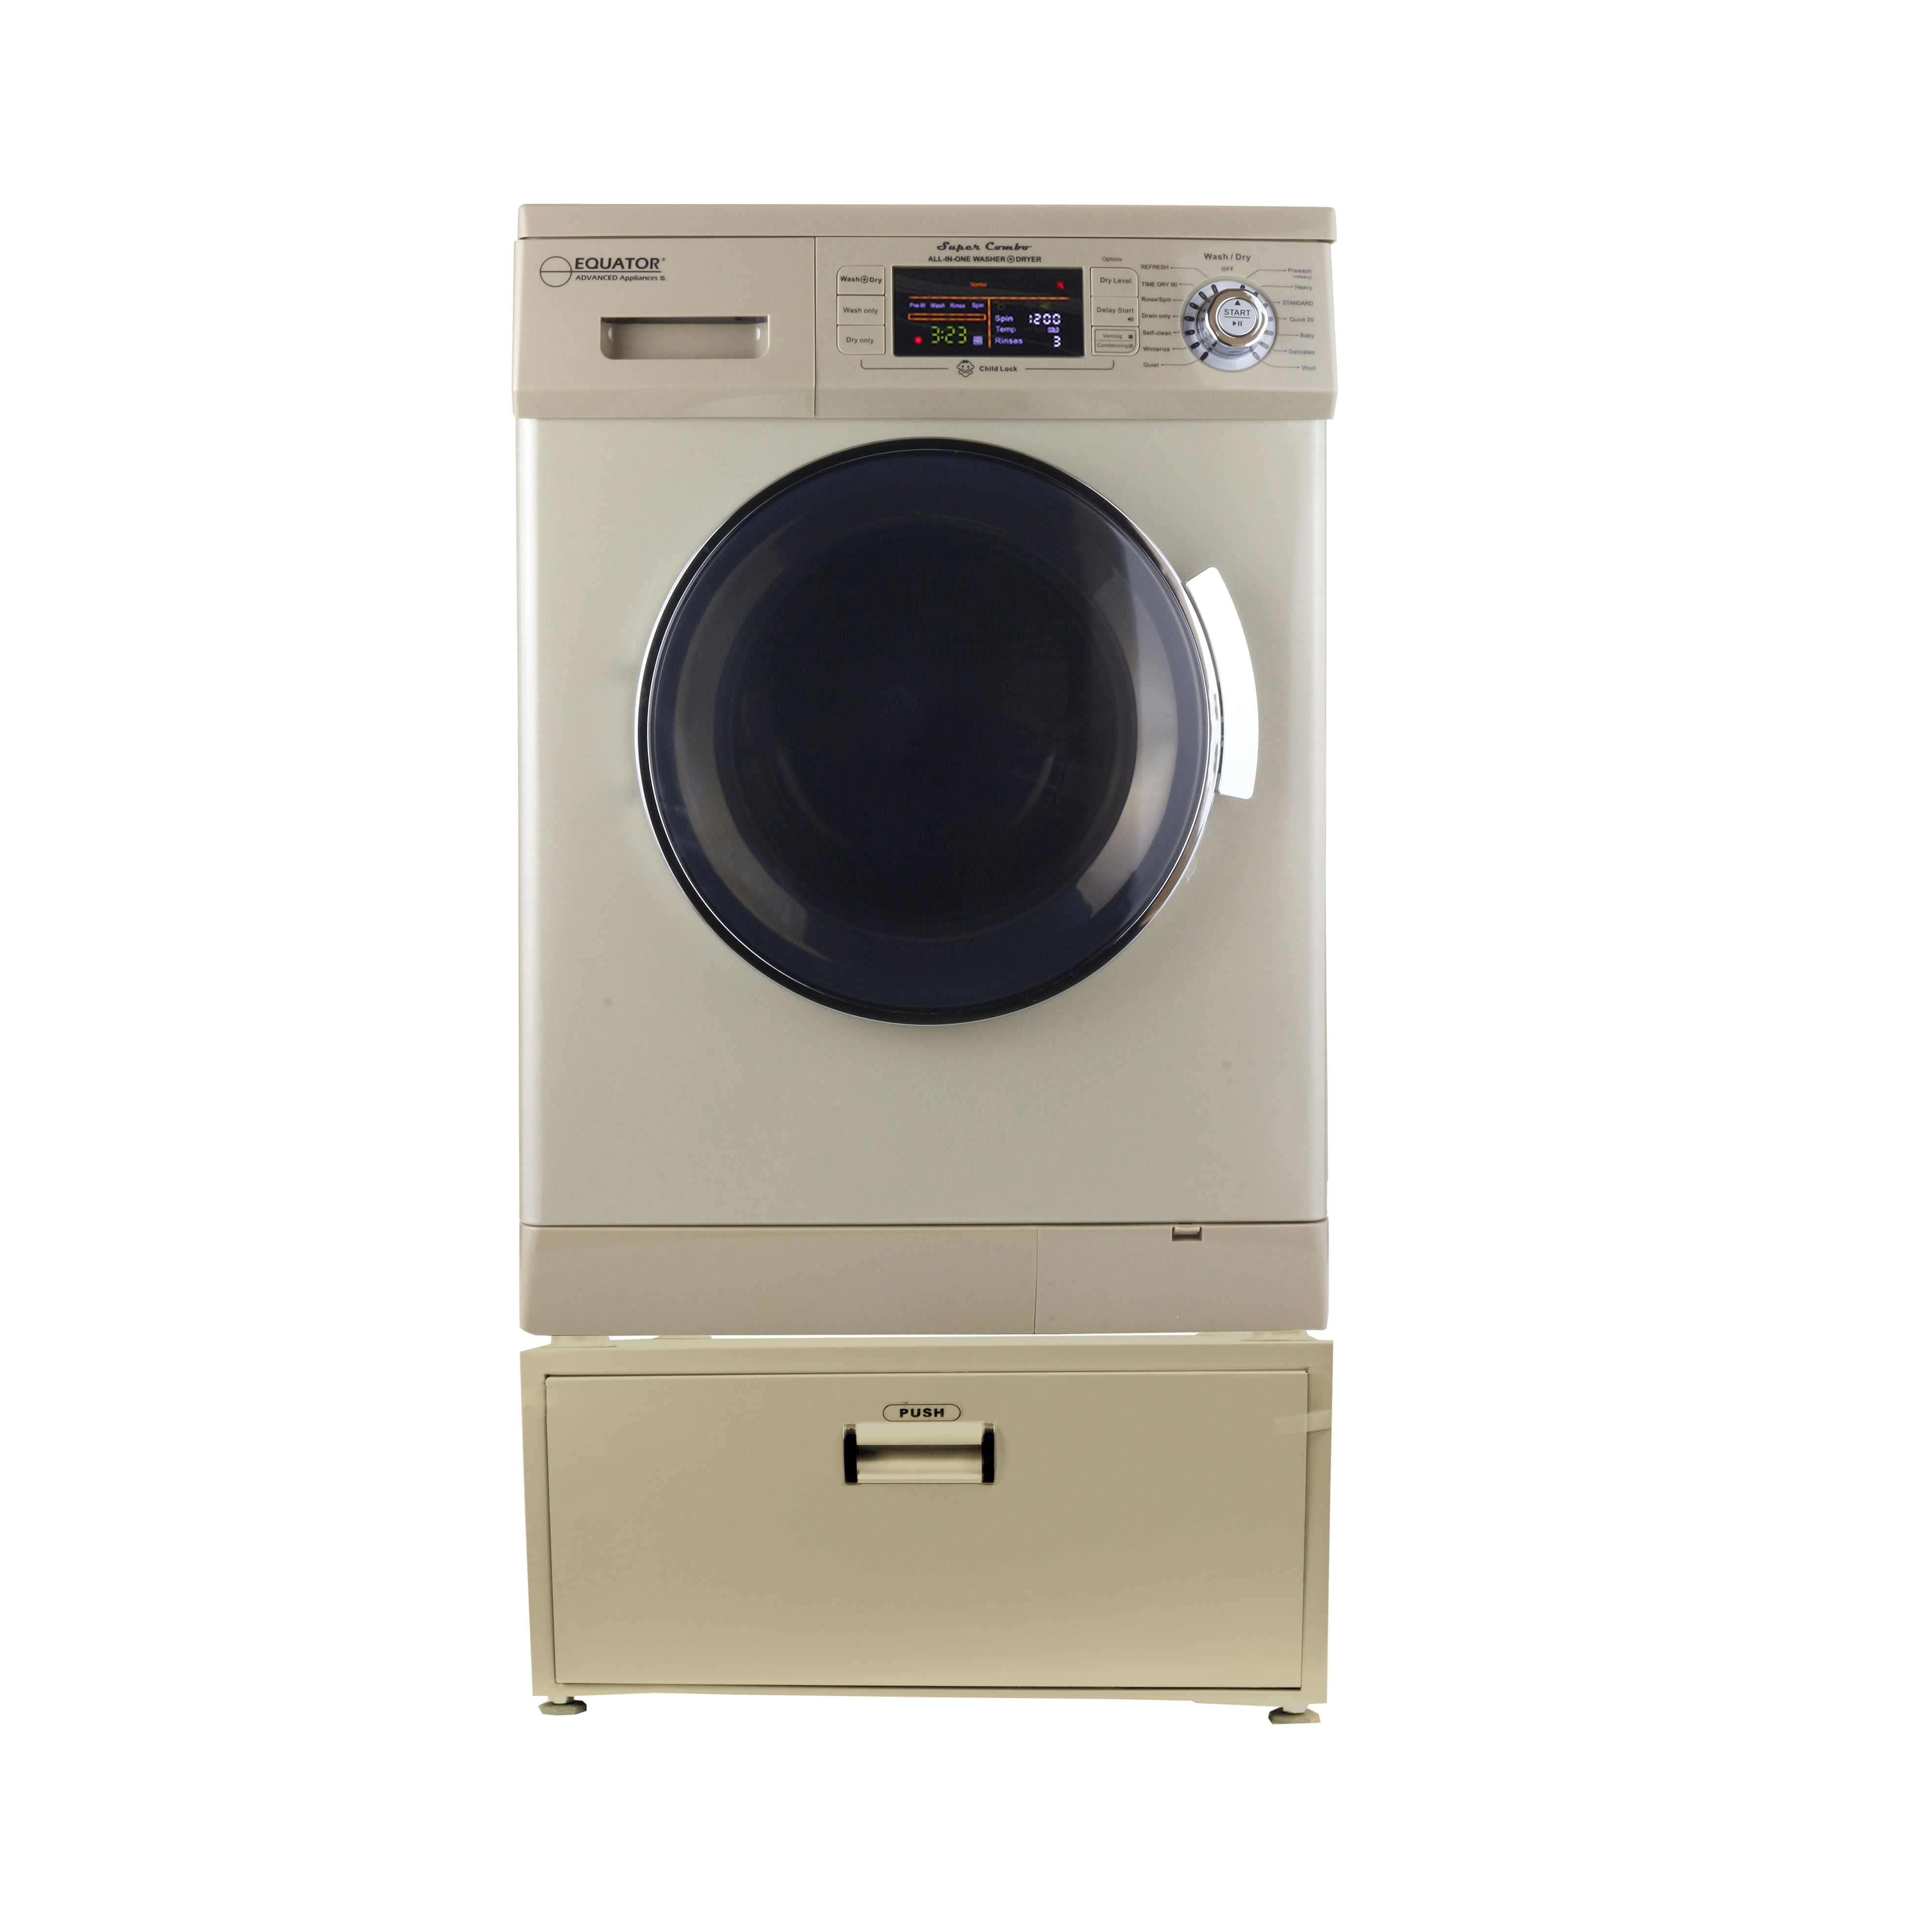 Equator EZ 4400 N Gold All-in-one New Compact Combo Washer Dryer with All In One Washer Dryer Reviews 2020